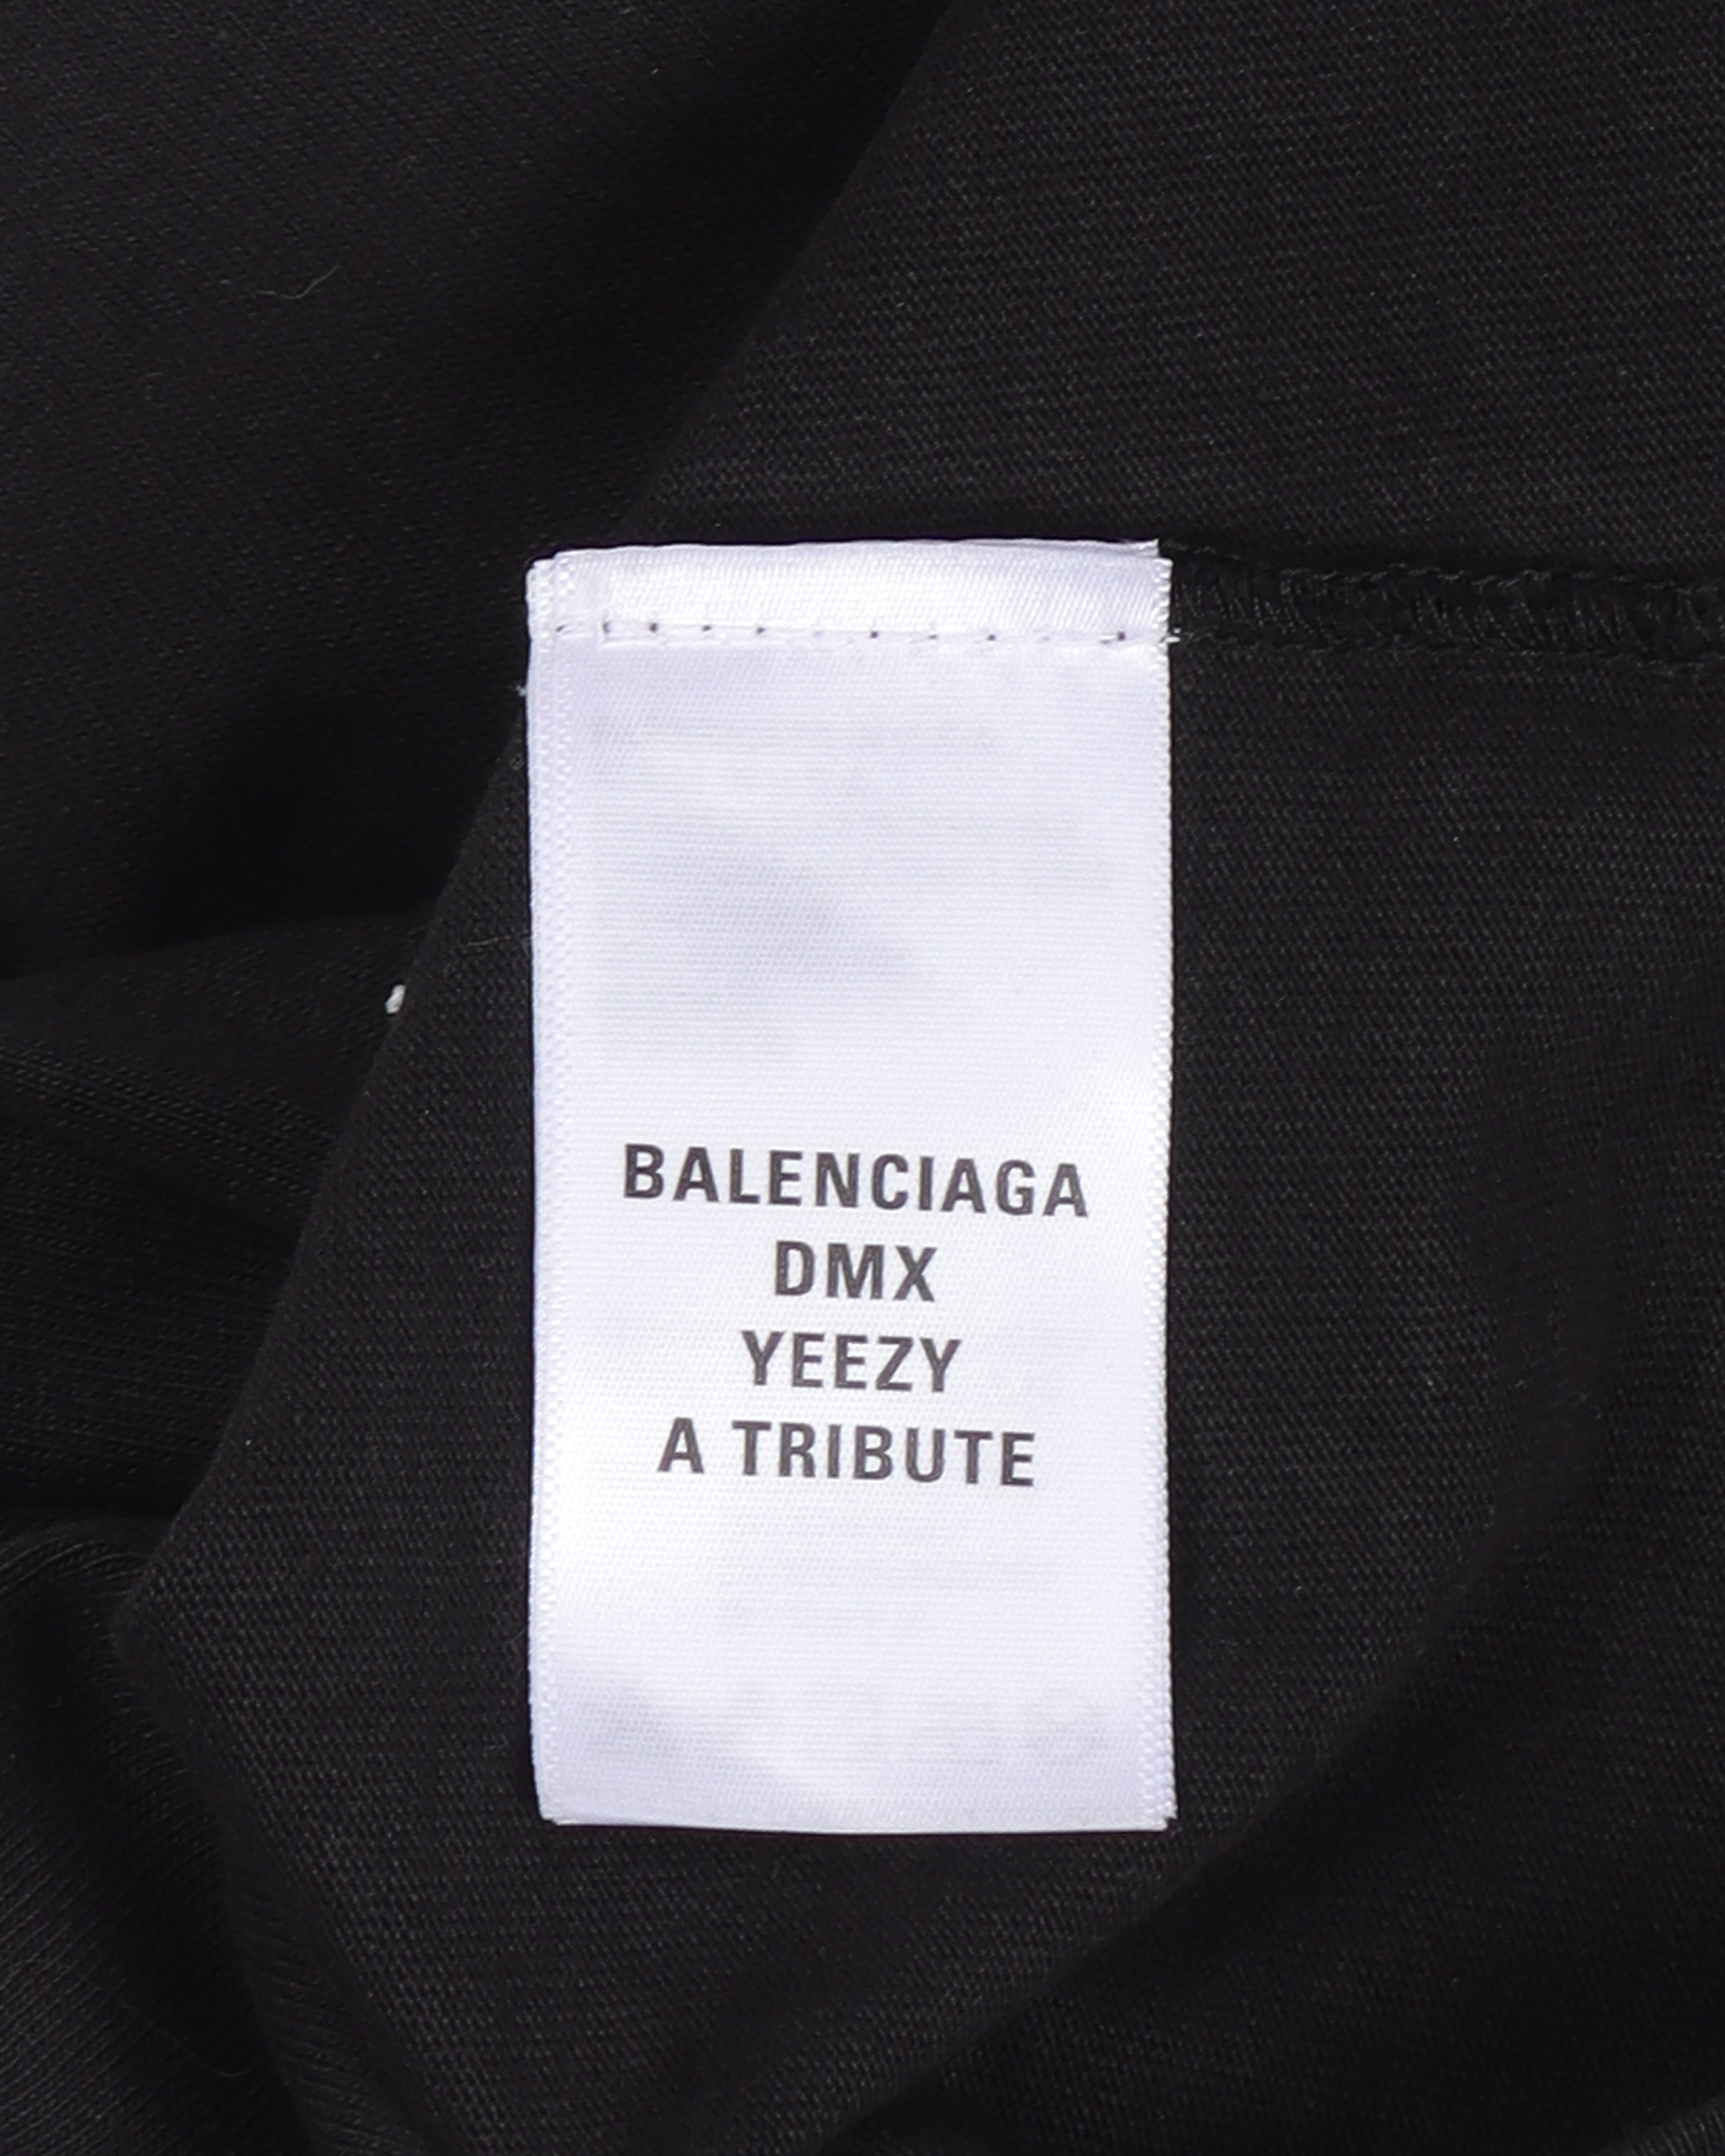 Kanye Wests Yeezy Brand And Balenciaga Release DMX Tribute TShirt  News   BET